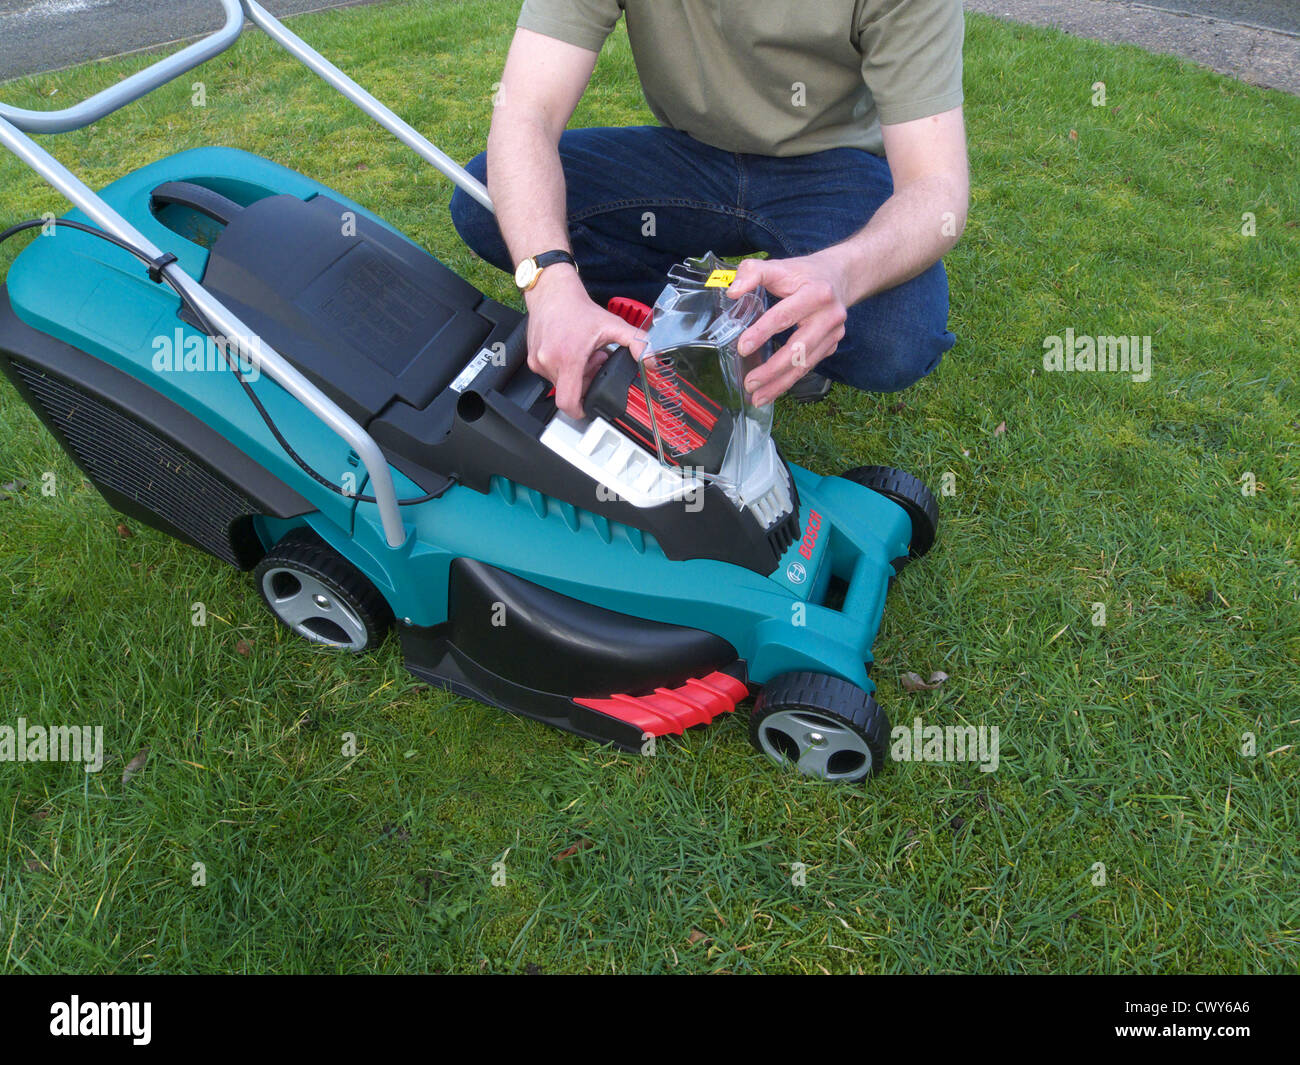 Caucasian Man Changing a Rechargeable Battery on a Bosch Rotak Rechargeable Lawnmower MODEL RELEASED Stock Photo